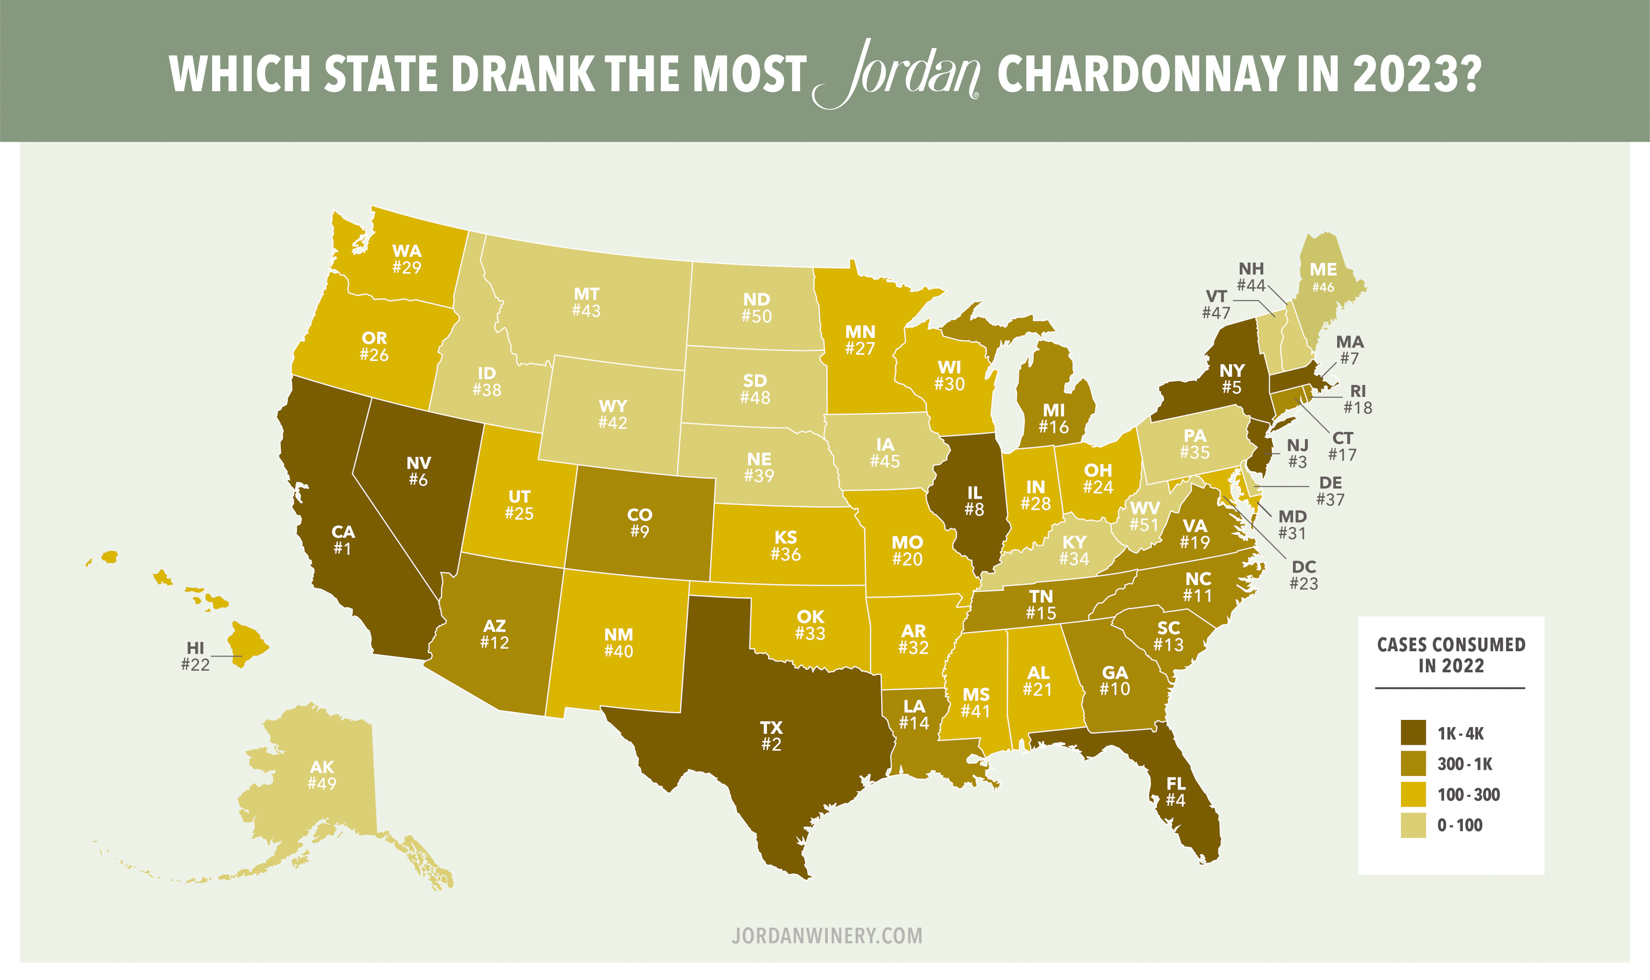 map of the united states with rankings of states that purchased the most cases of jordan chardonnay in 2023